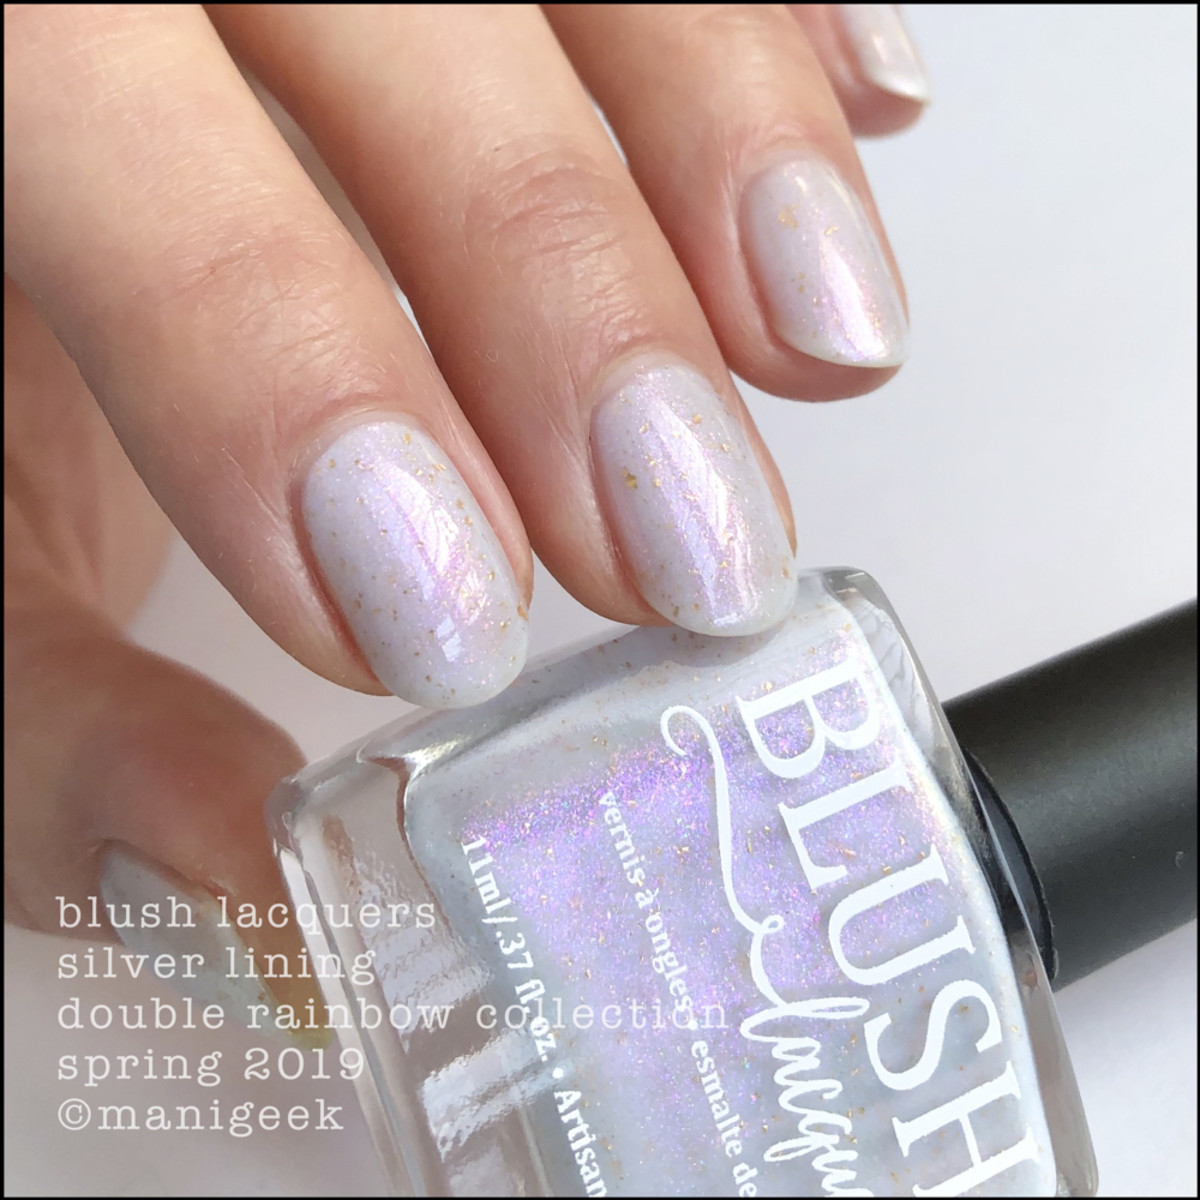 Blush Lacquers Silver Lining - Blush Double Rainbow Shimmers Collection Swatches 2019